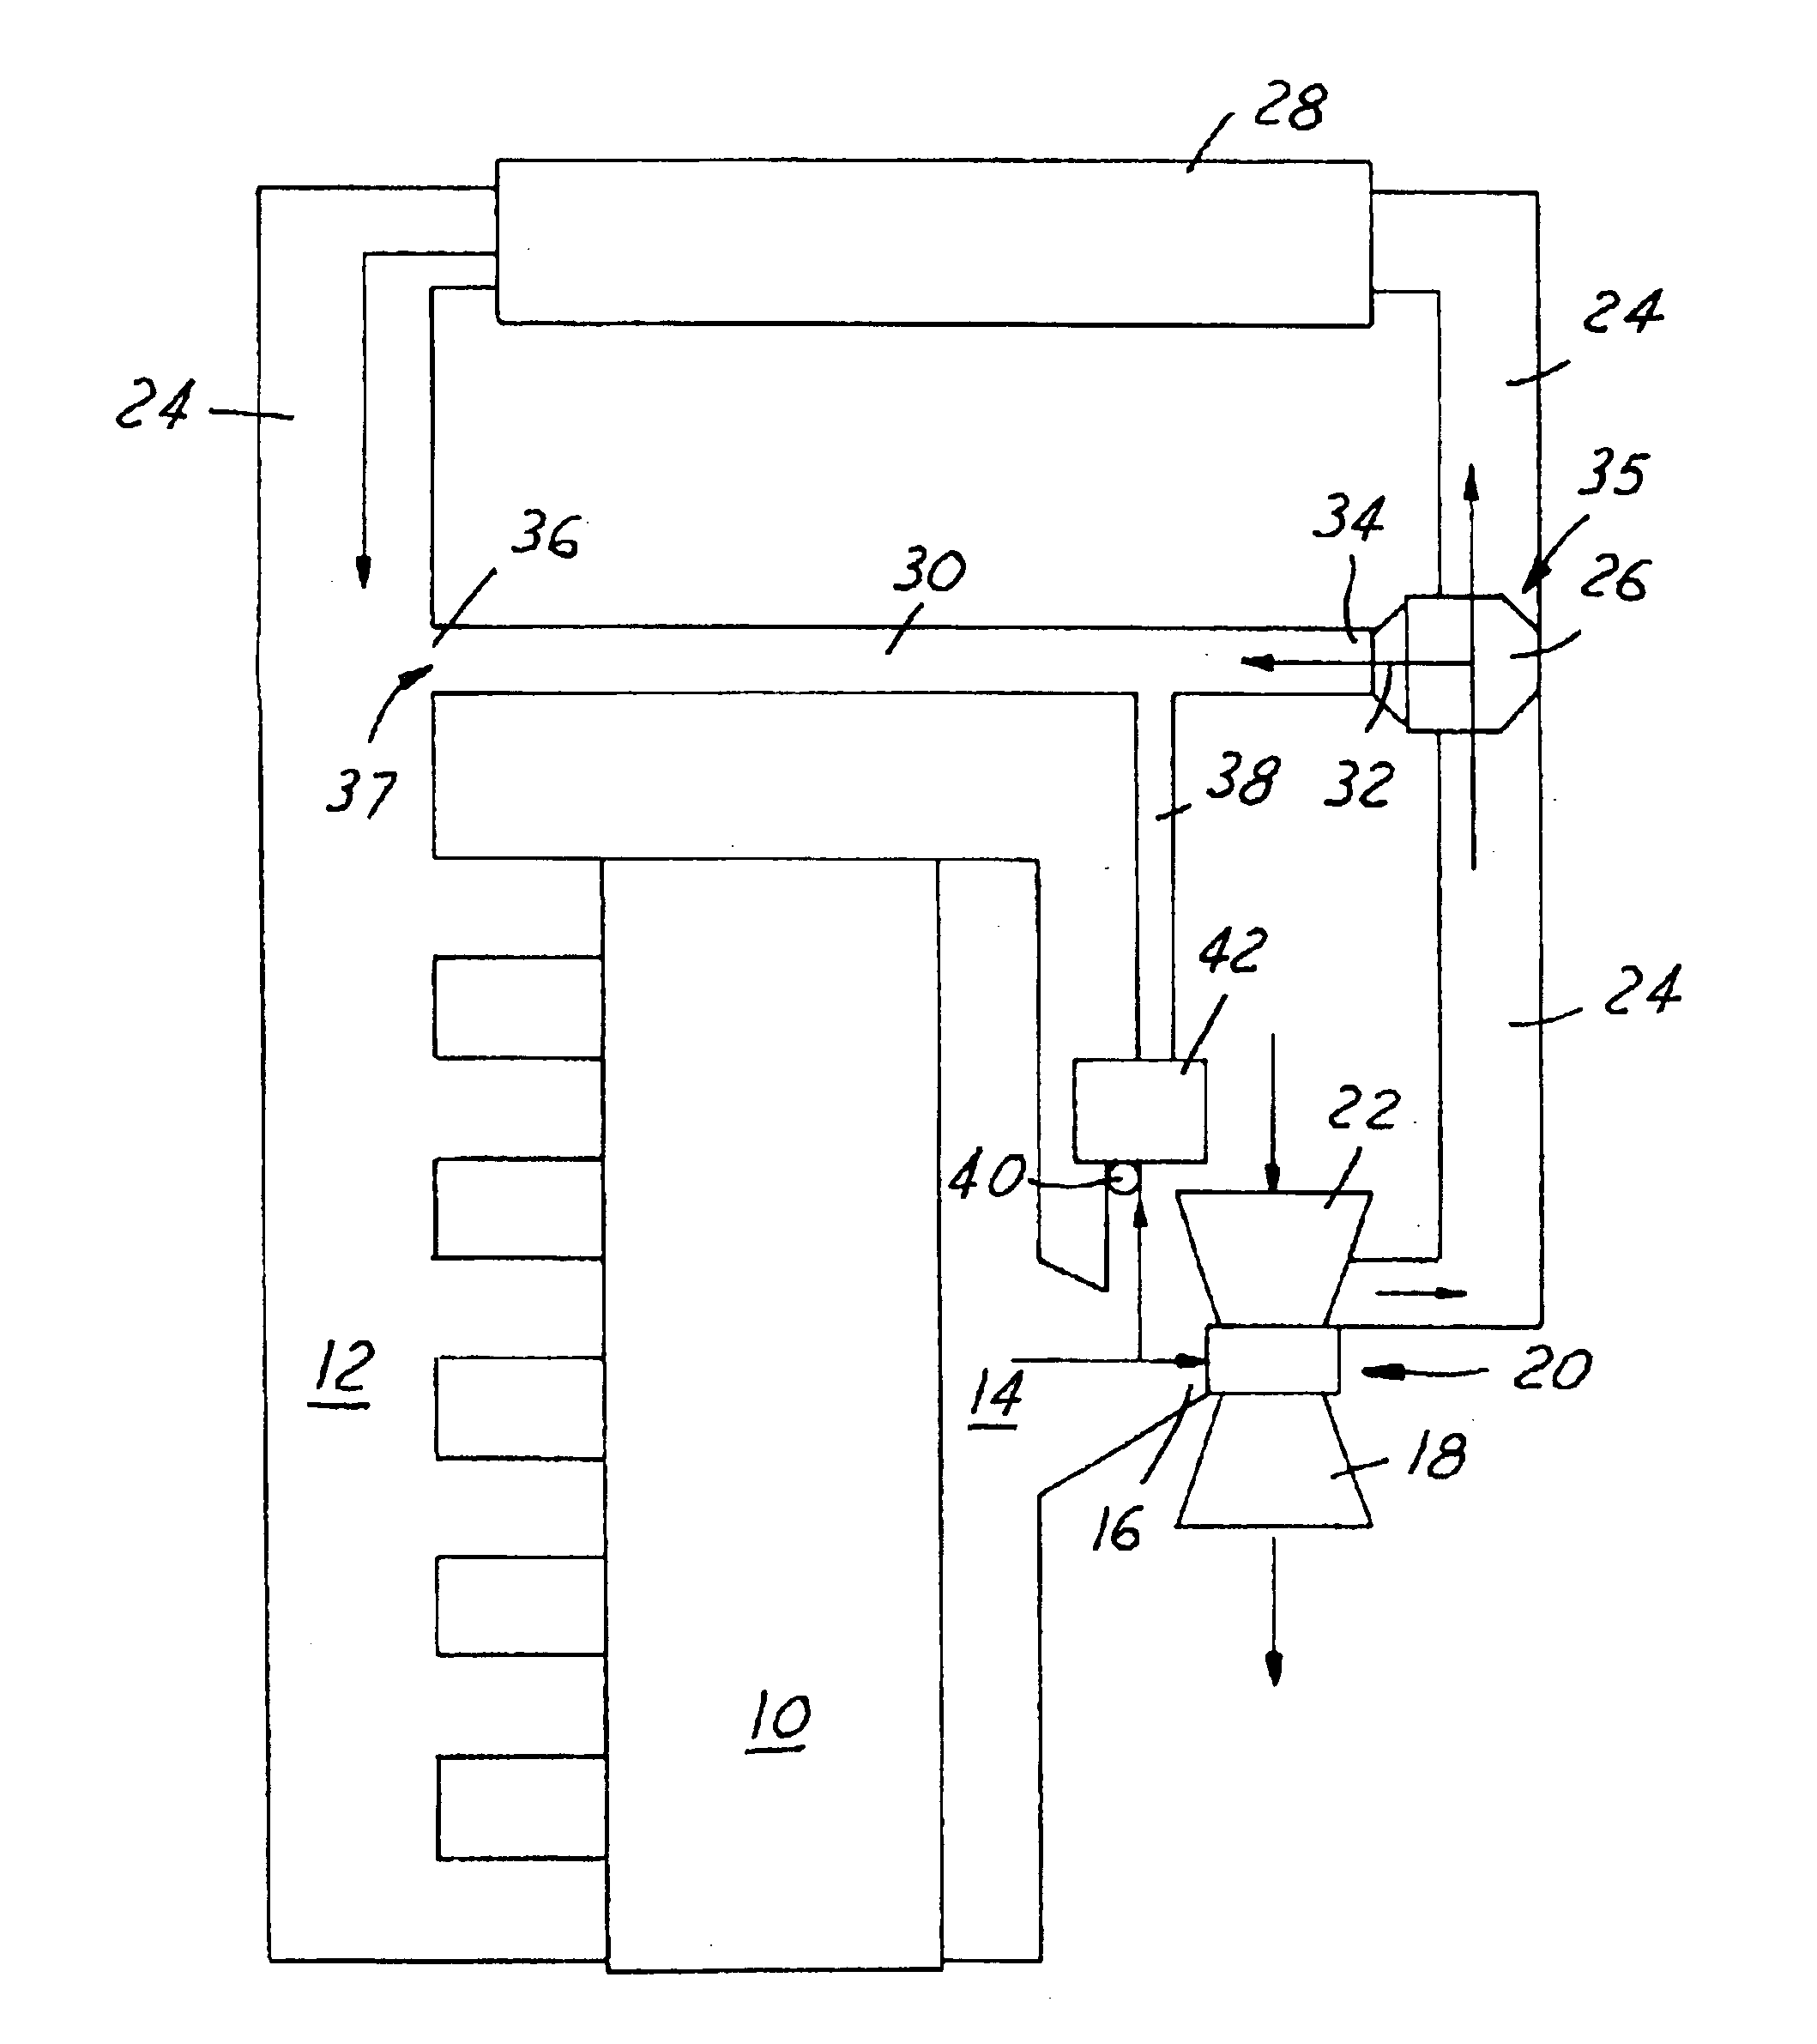 Charged air intake system for an internal combustion engine